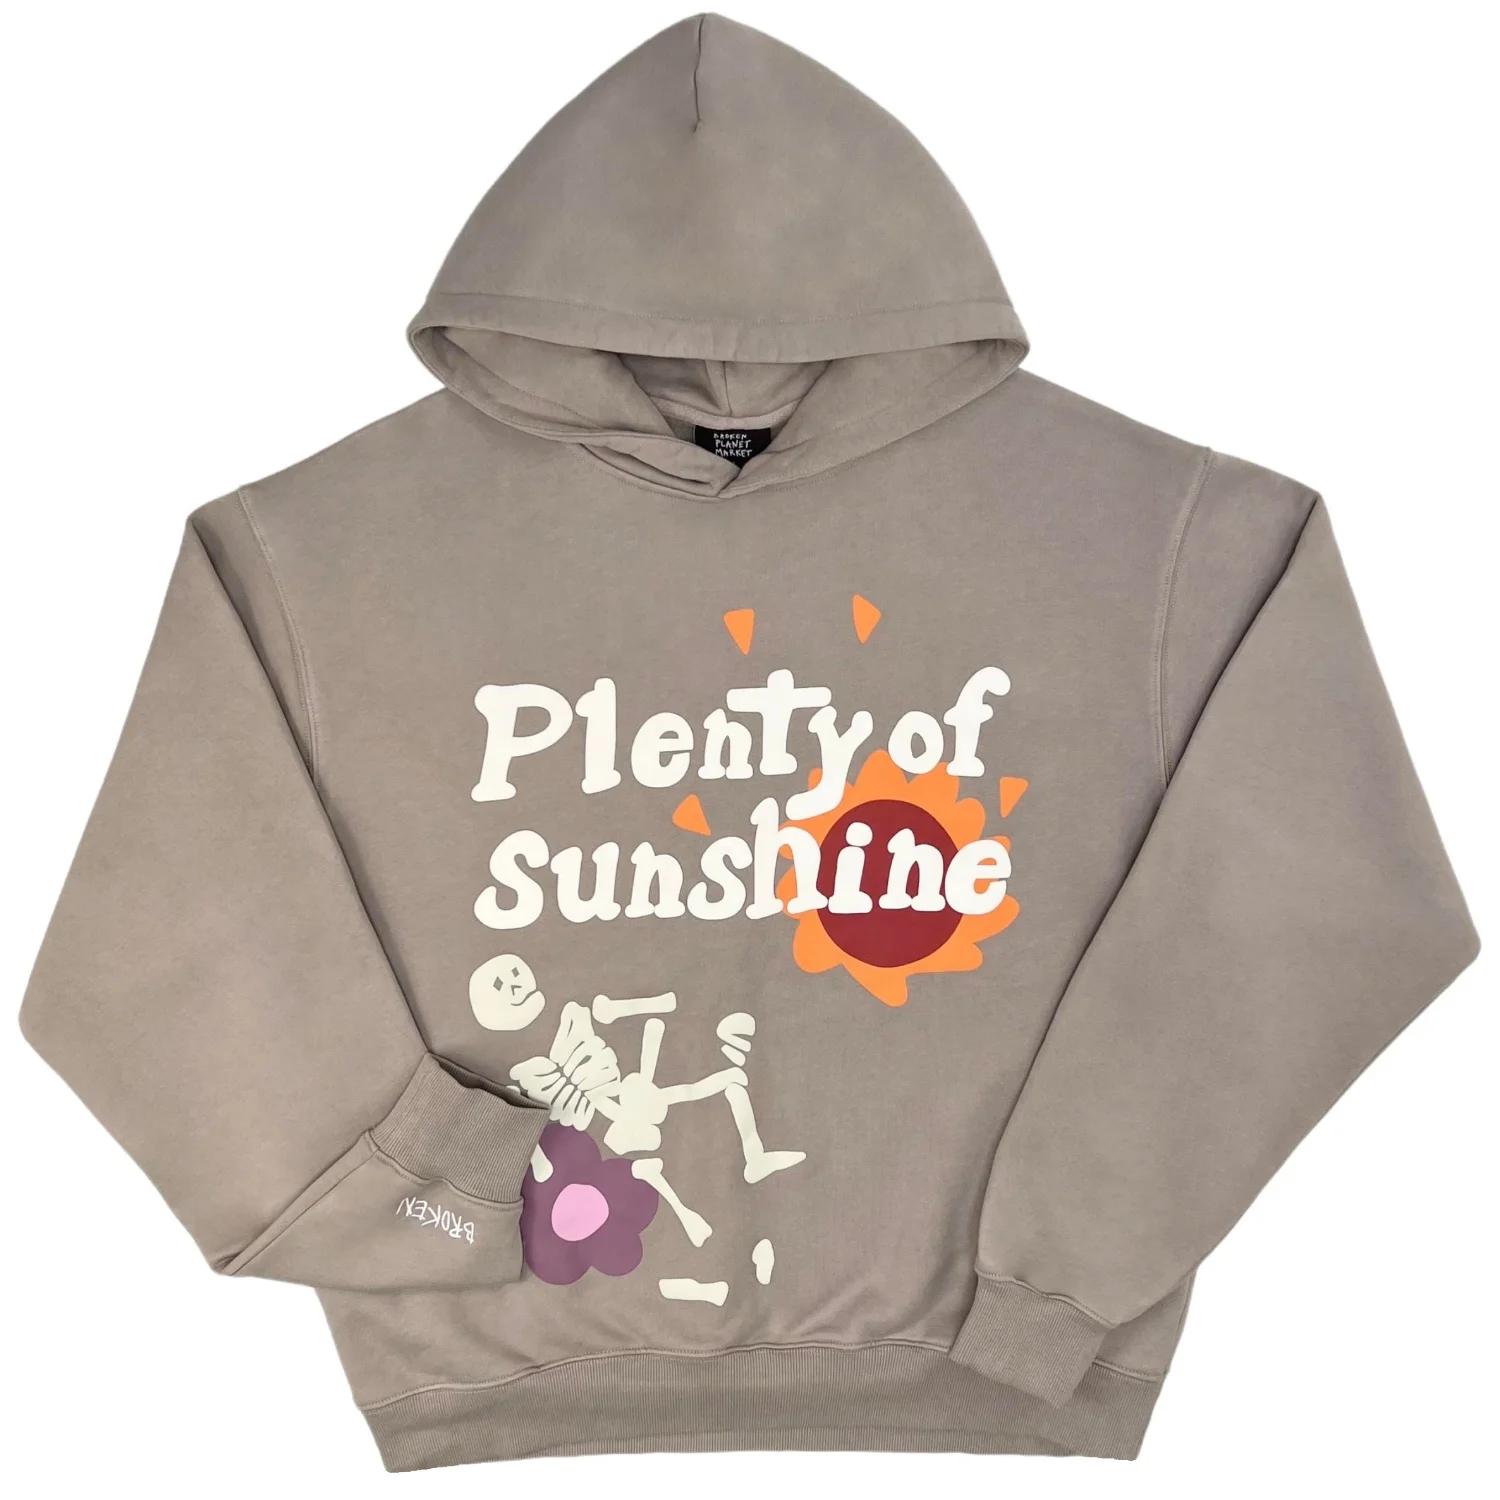 Broken Planet Hoodie, Men's Fashion, Coats, Jackets and Outerwear